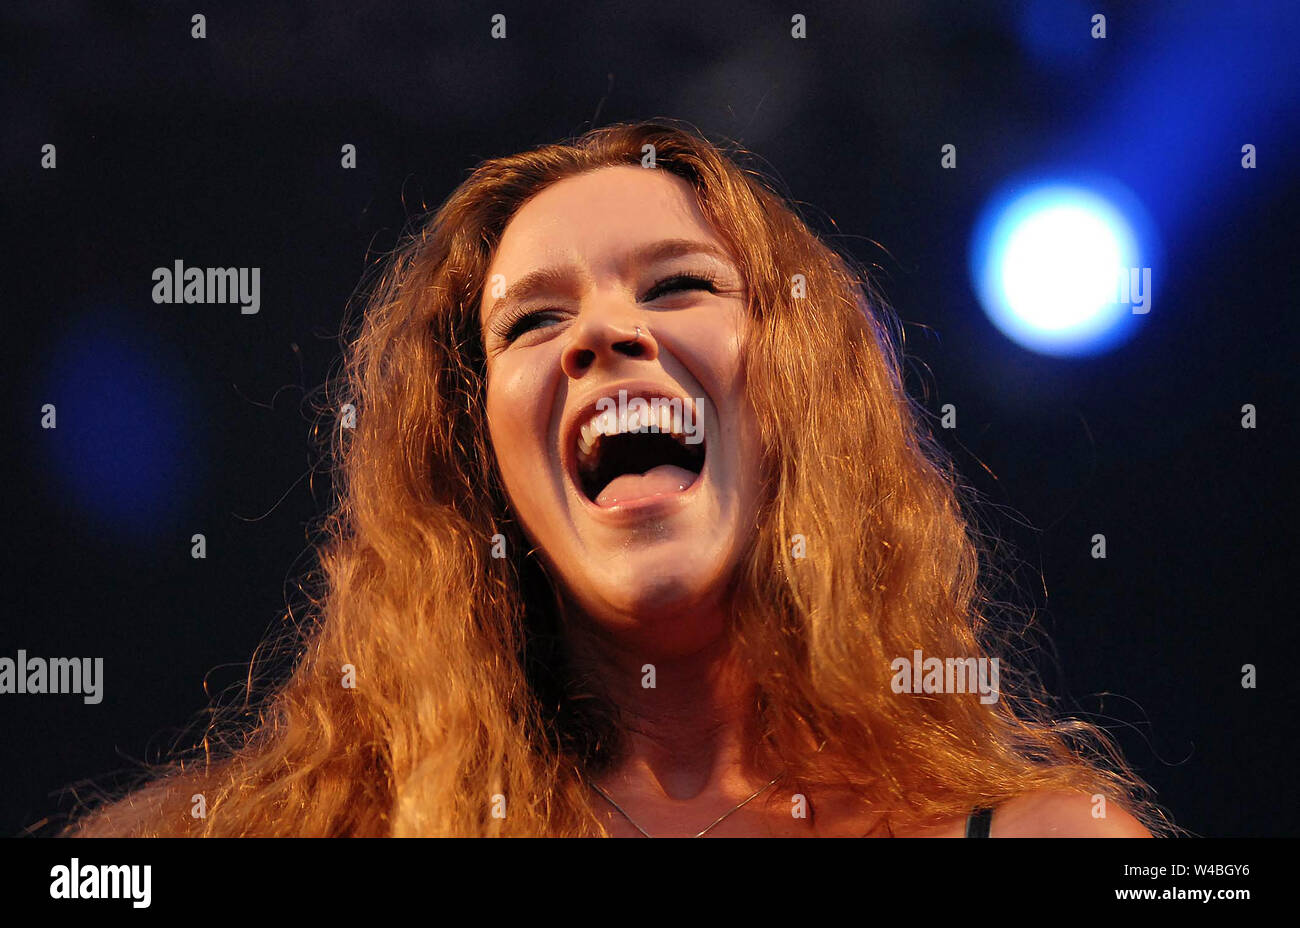 Singer Joss Stone, during the presentation of her show at Rock in Rio 2011, in the city of Rio de Janeiro, Brazil. Stock Photo